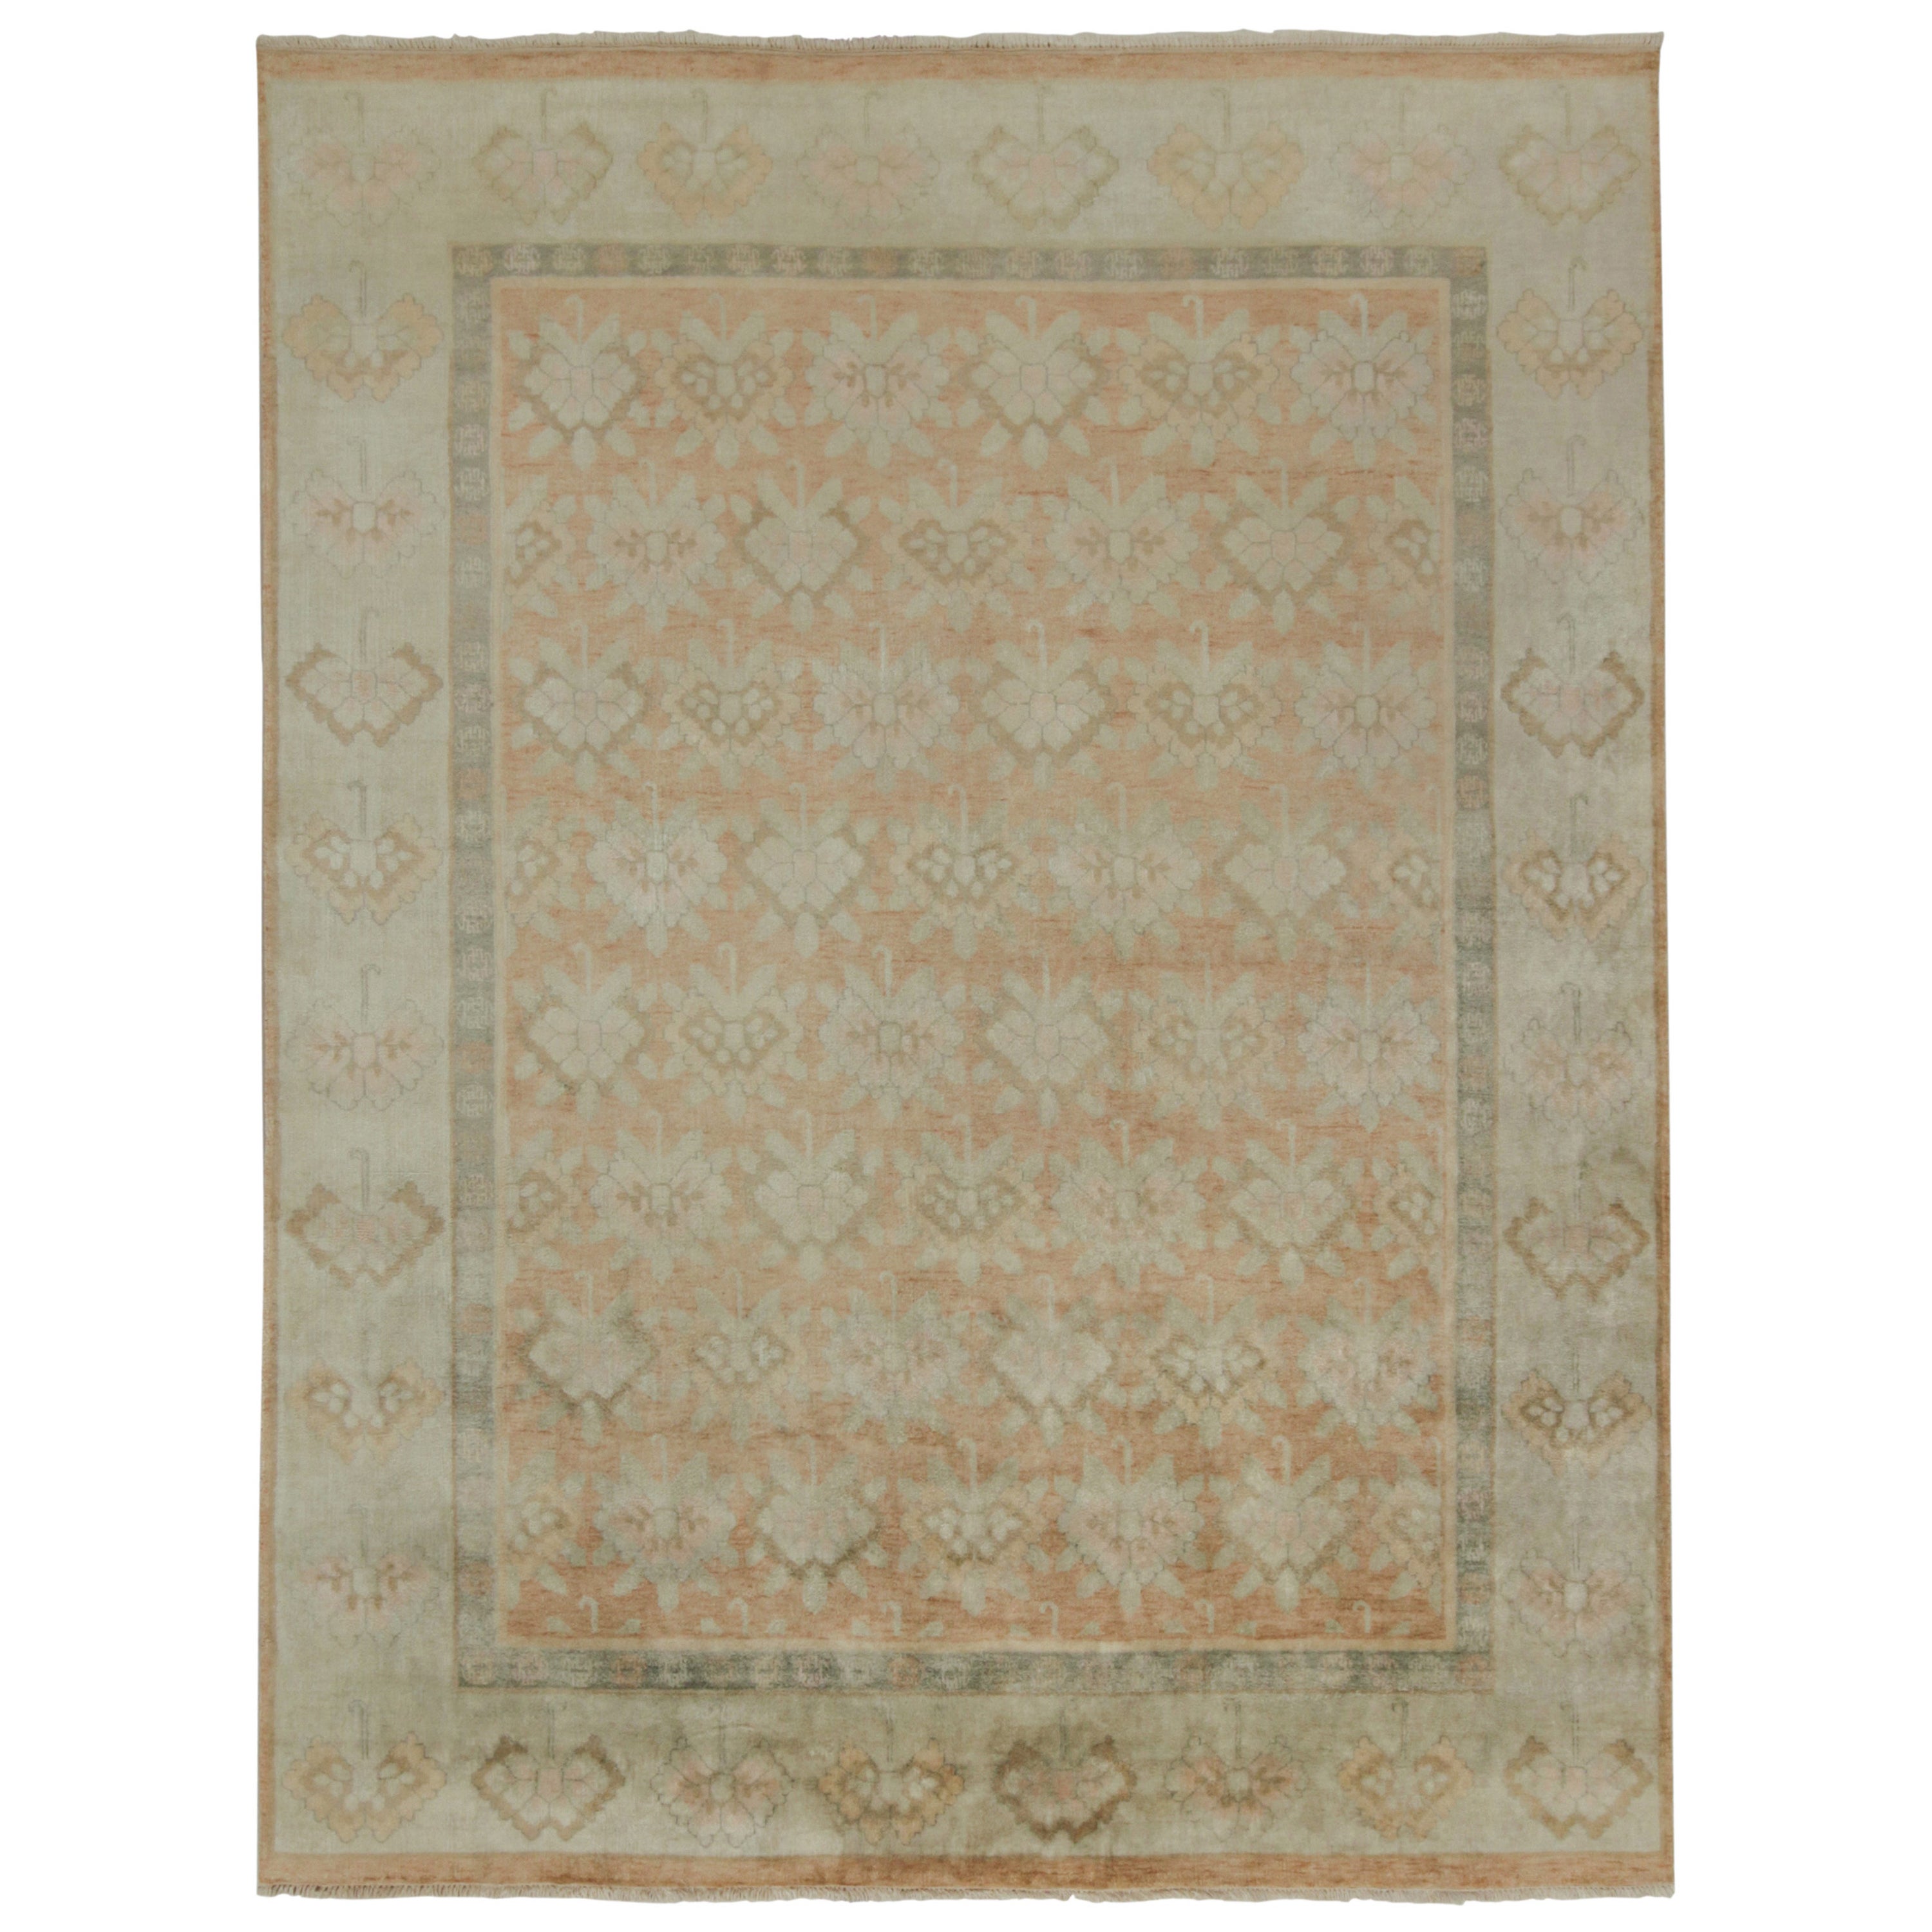 Rug & Kilim’s European Style Rug with Orange, Blue and Pink Floral Pattern